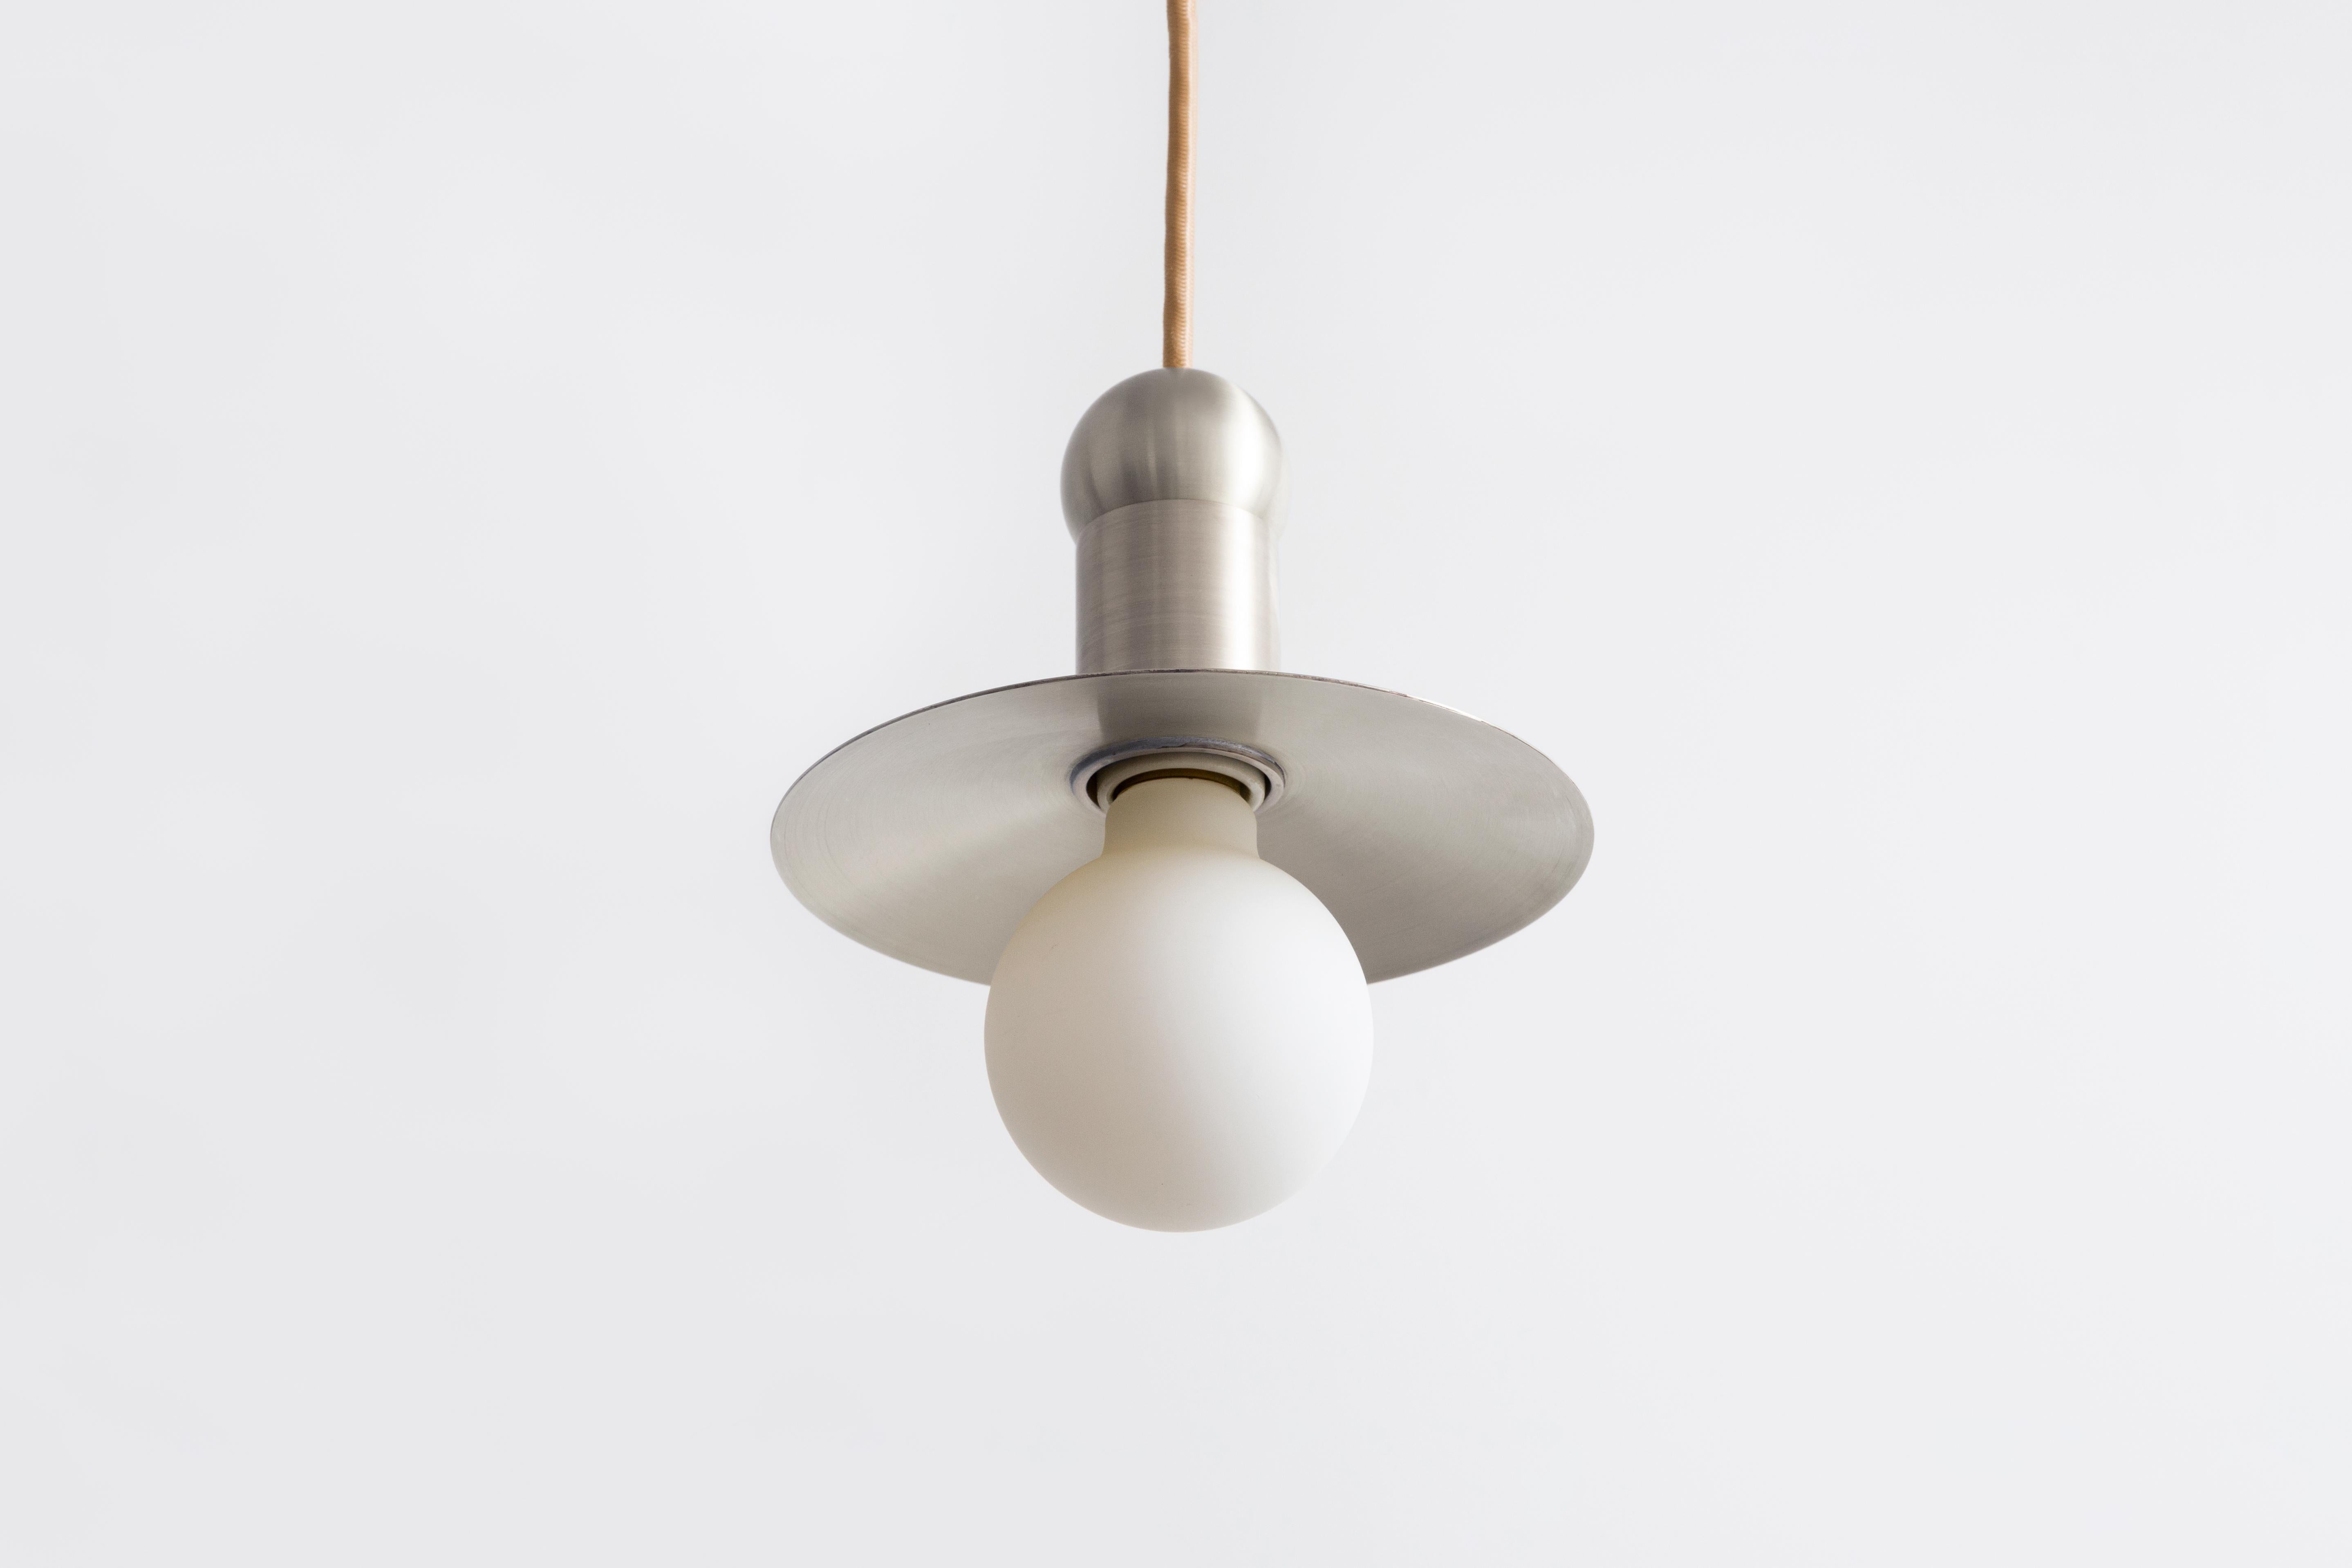 The orbit cord pendant positions a single glowing bulb against a stationary radiant dish, exploring the scale and illumination of an early American candle via the form of a traditional down-light pendant. With rotund details, each pendant provides a